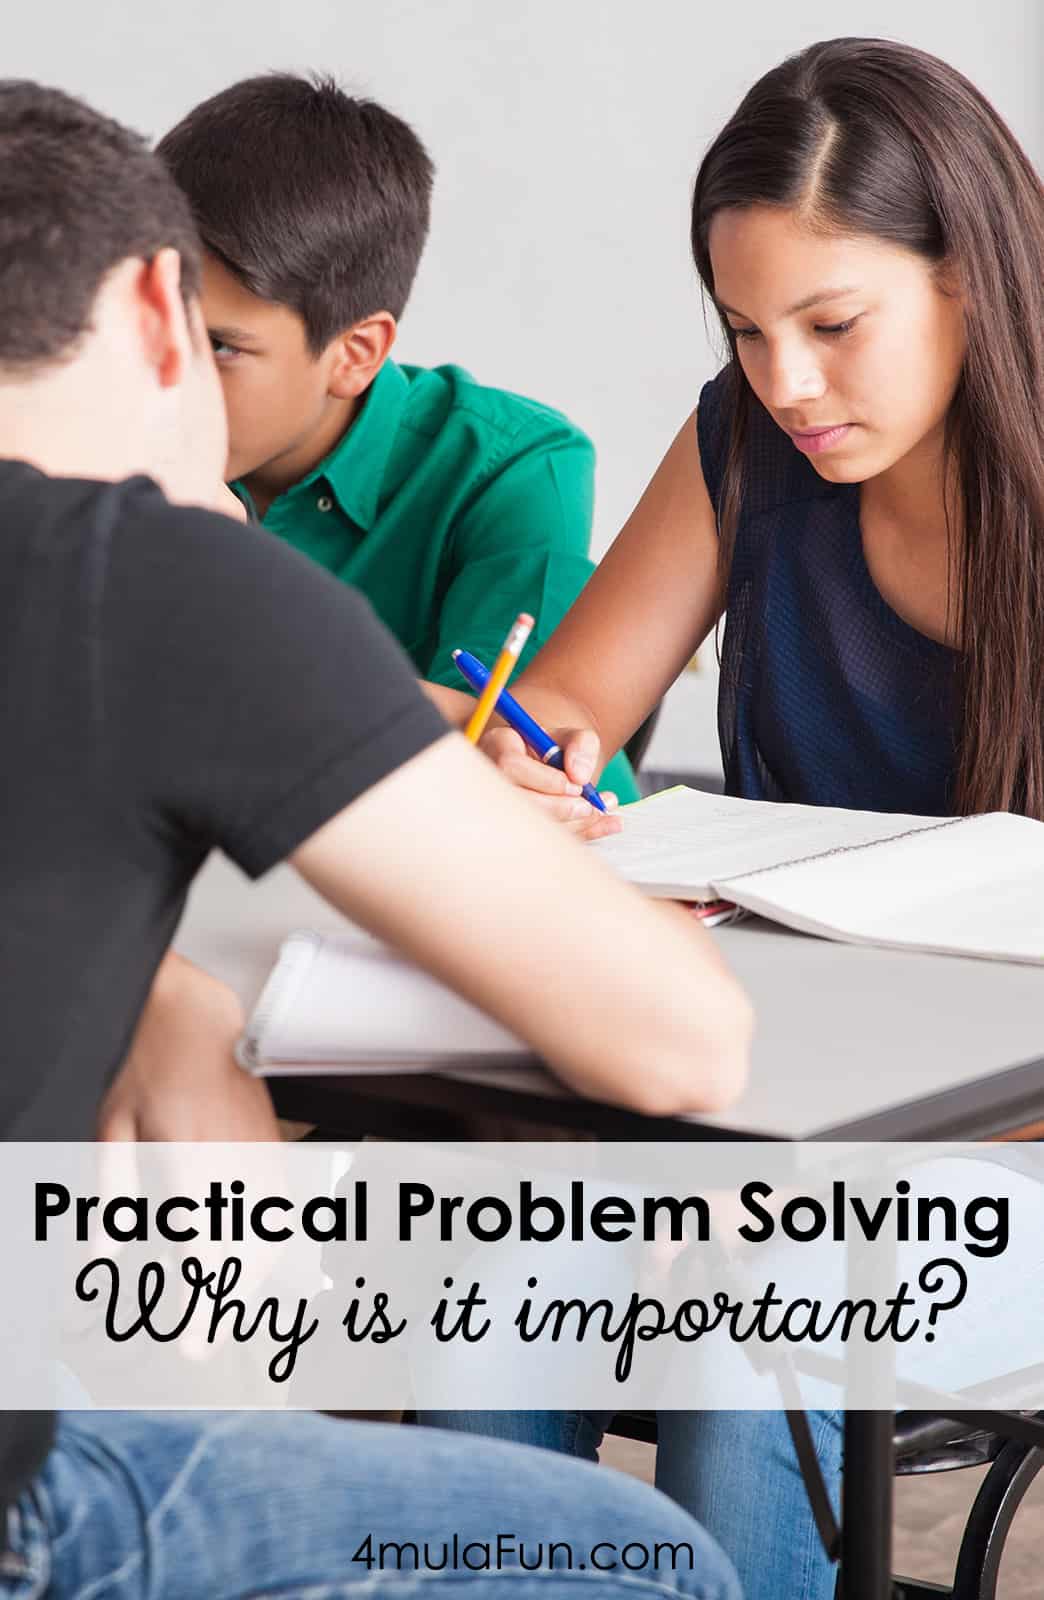 the rational/logical approach to problem solving is only suitable for